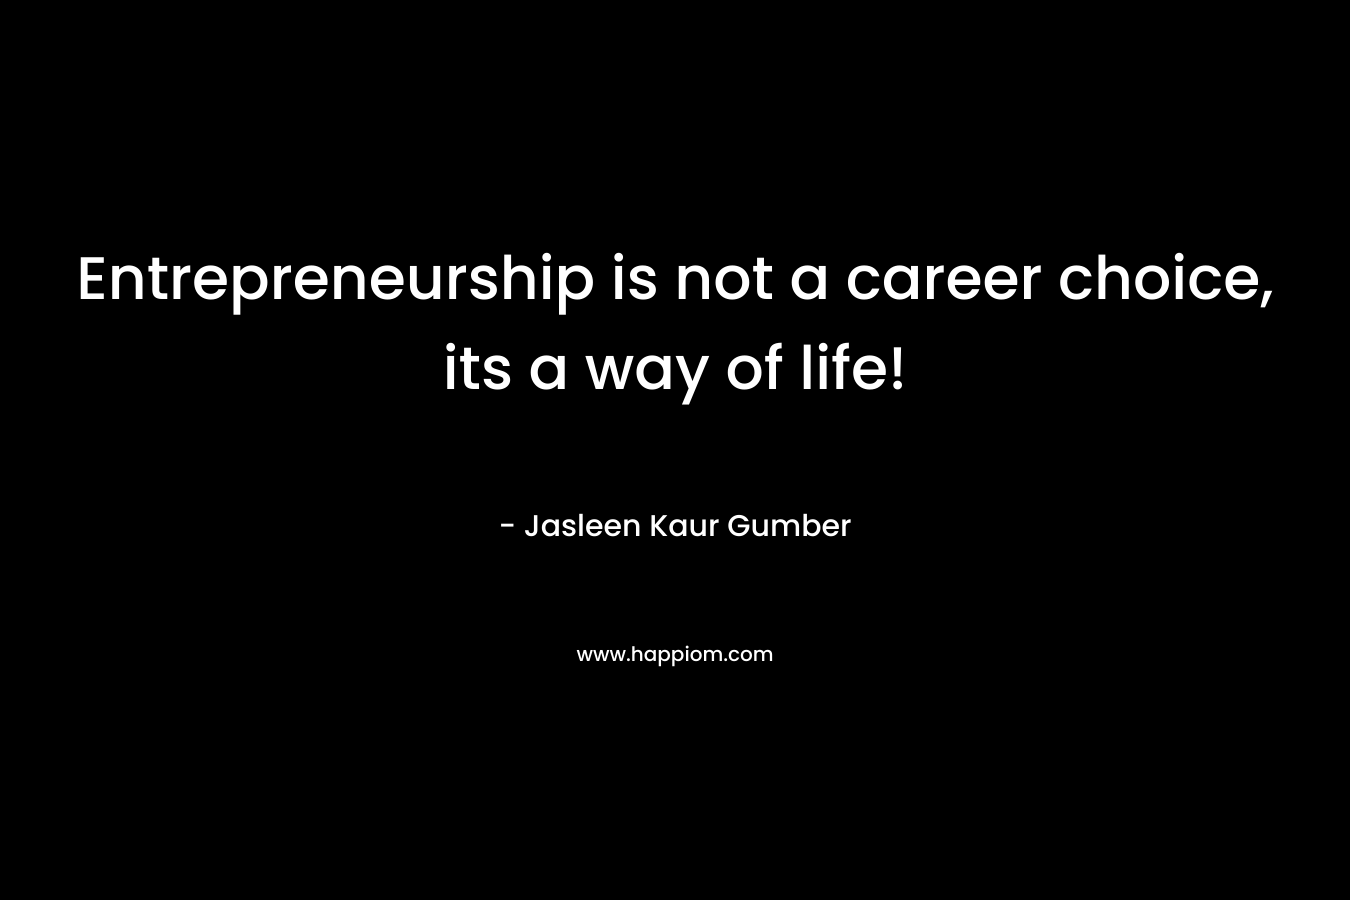 Entrepreneurship is not a career choice, its a way of life!